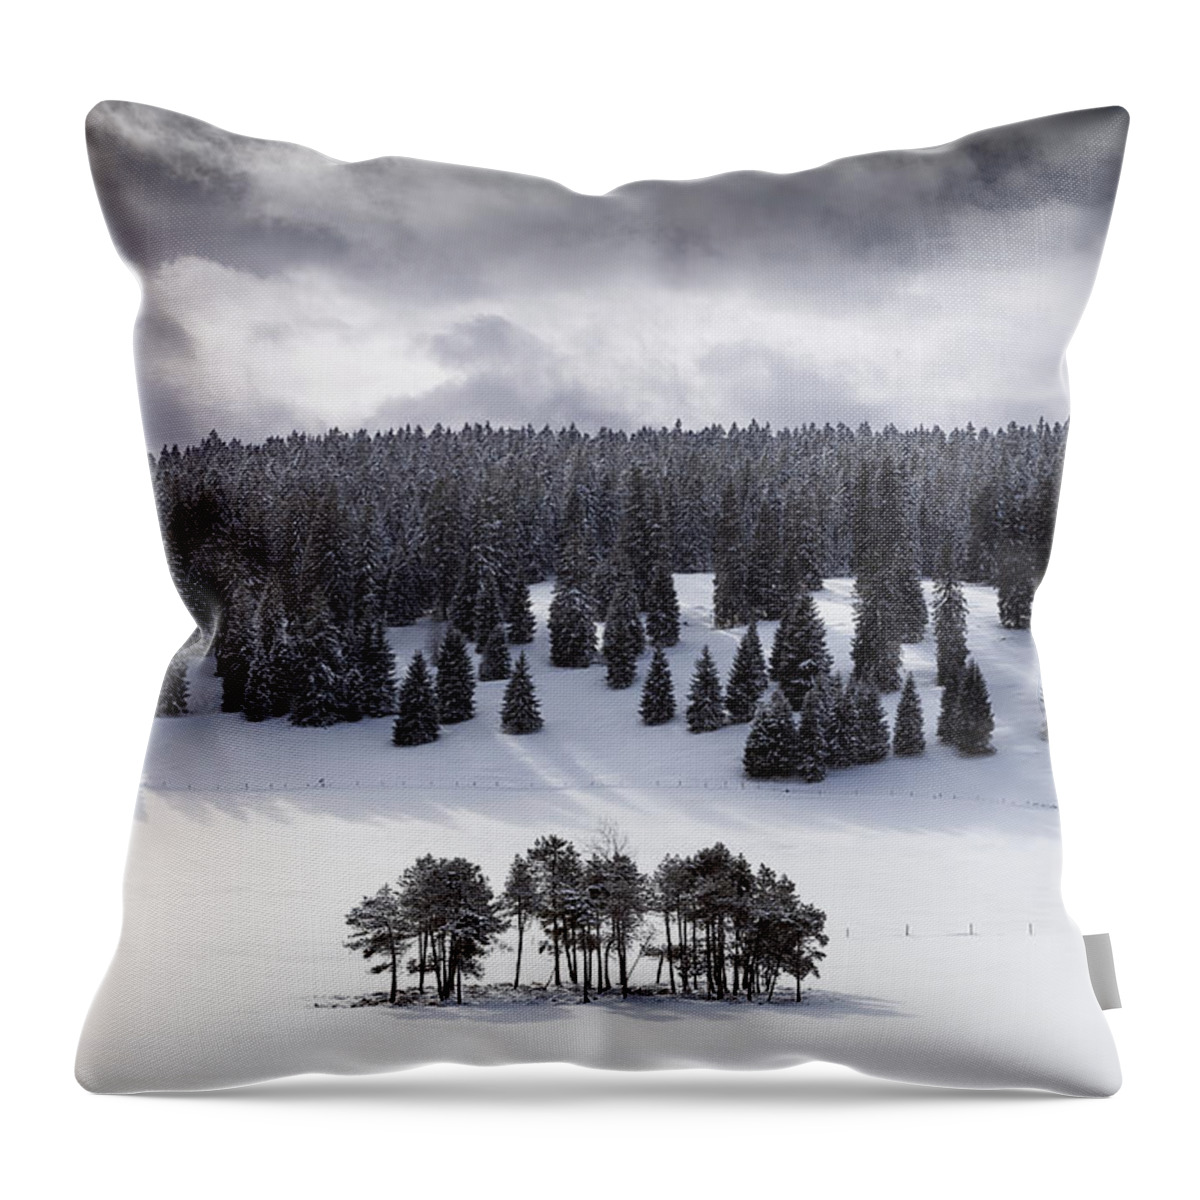 Hill Throw Pillow featuring the photograph The leaders by Dominique Dubied